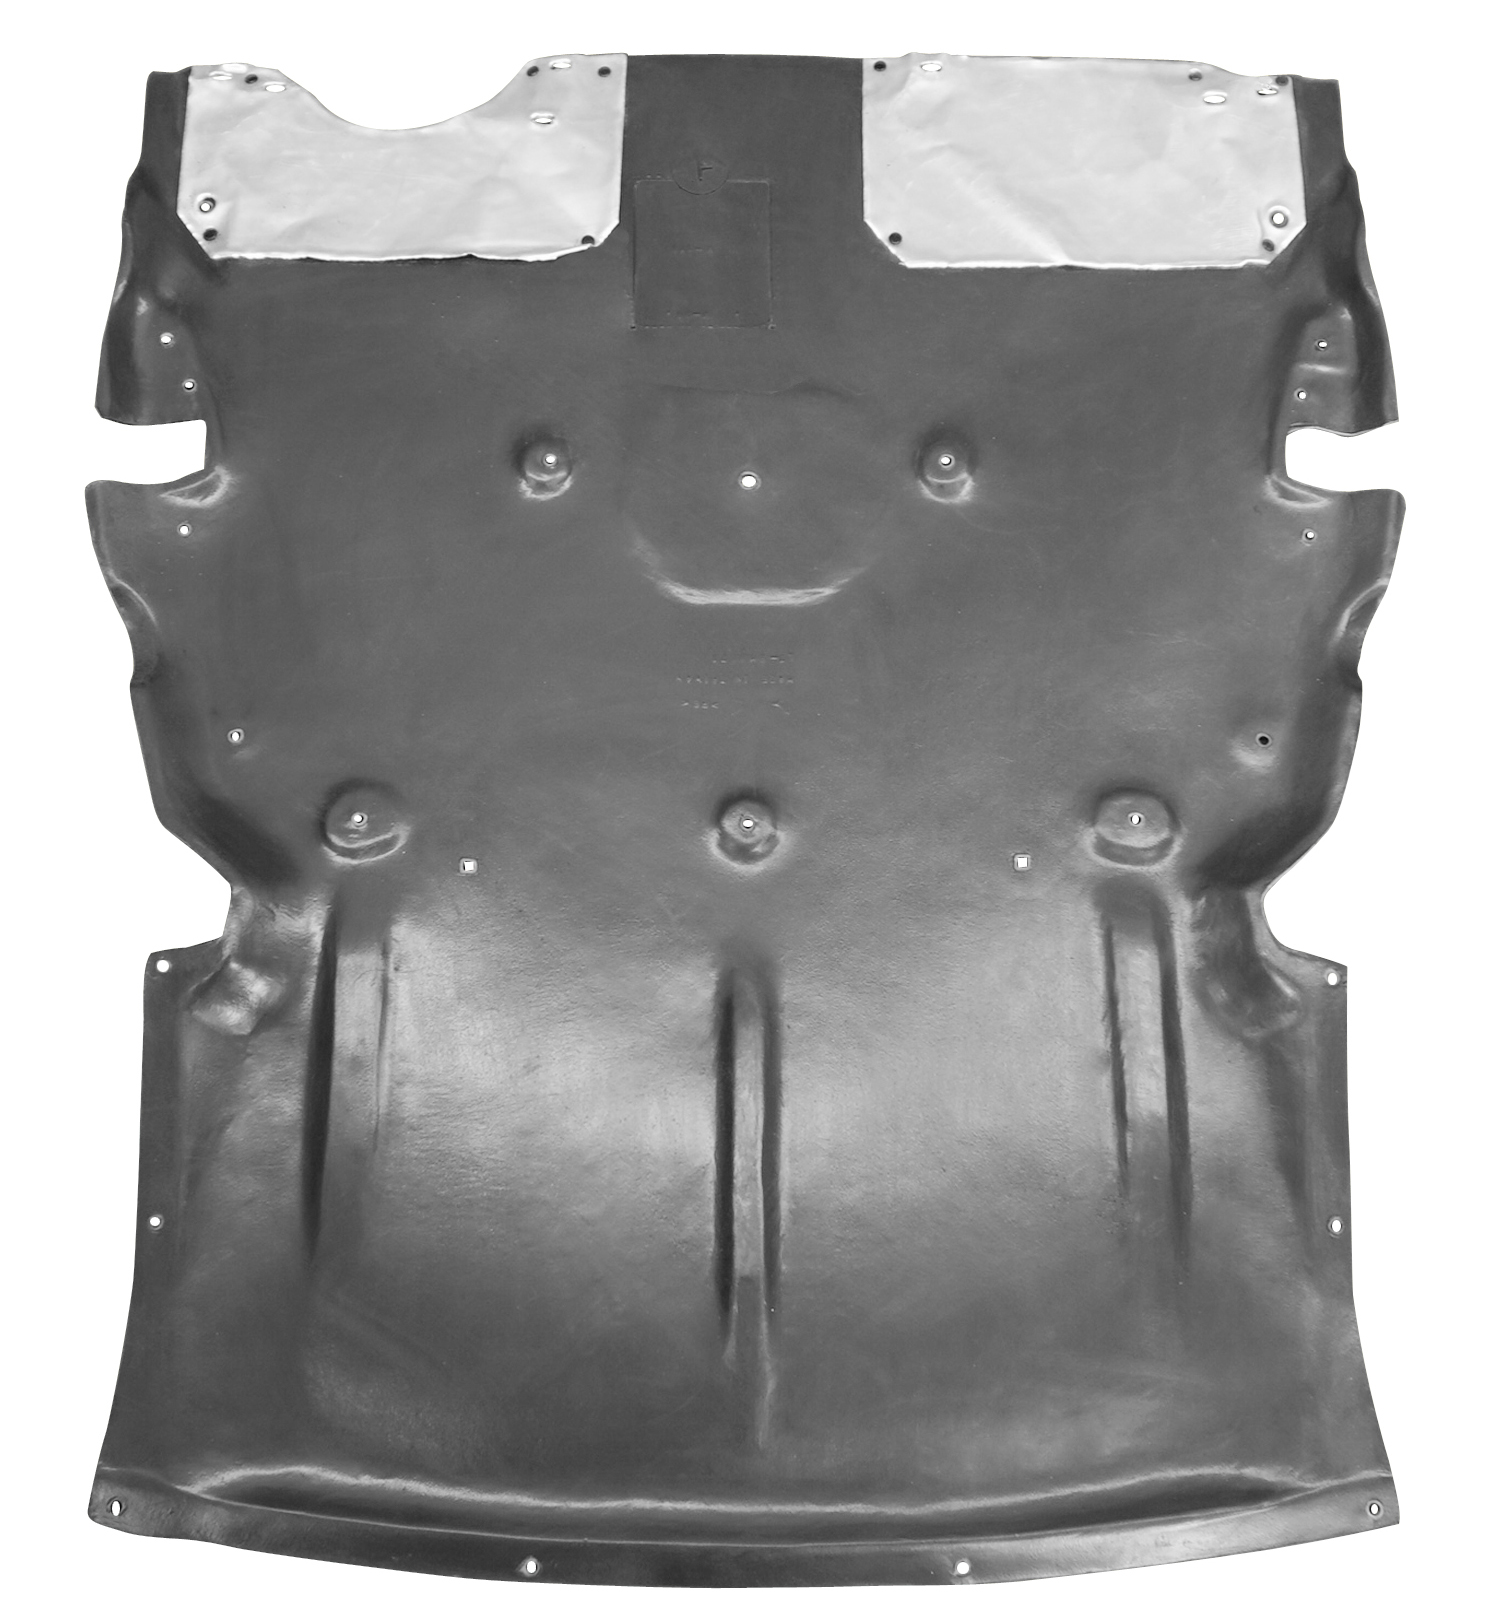 Aftermarket UNDER ENGINE COVERS for BMW - 328I, 328i,12-16,Lower engine cover